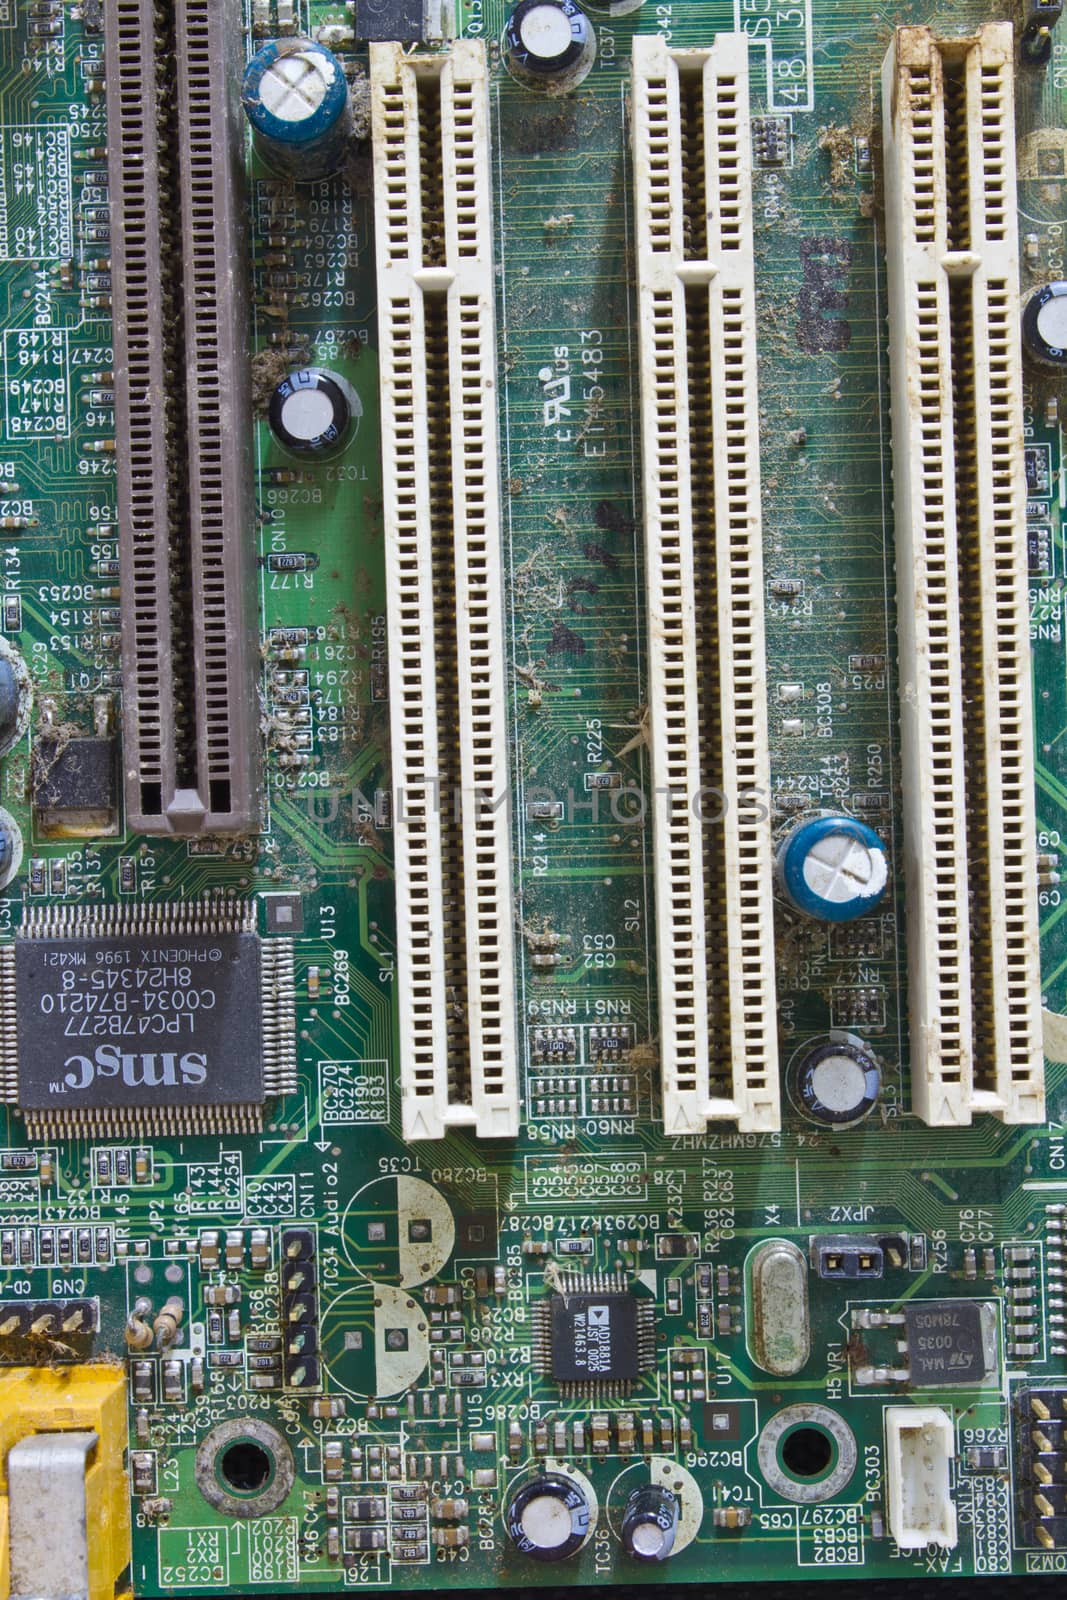 Detail circuit, detail dusty old computer mainboard